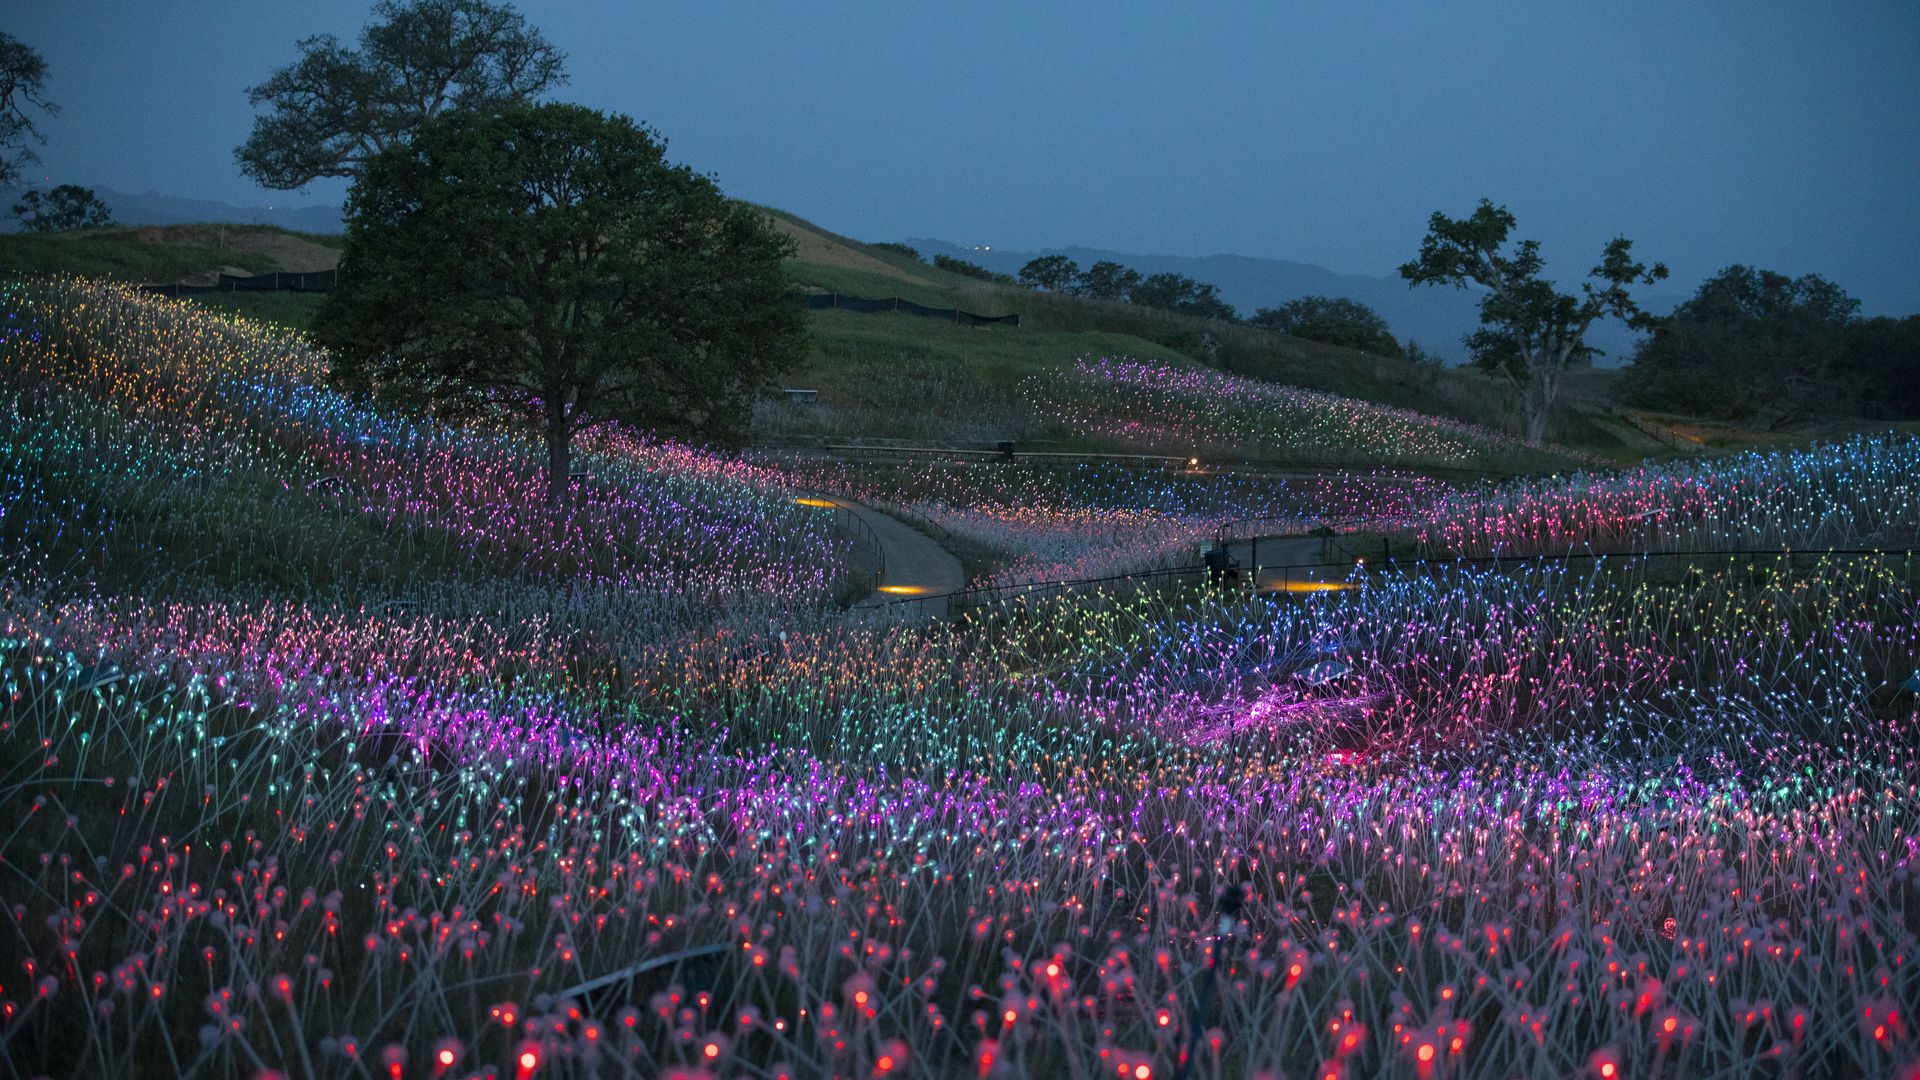 A view of the Field of Light art installation in California.